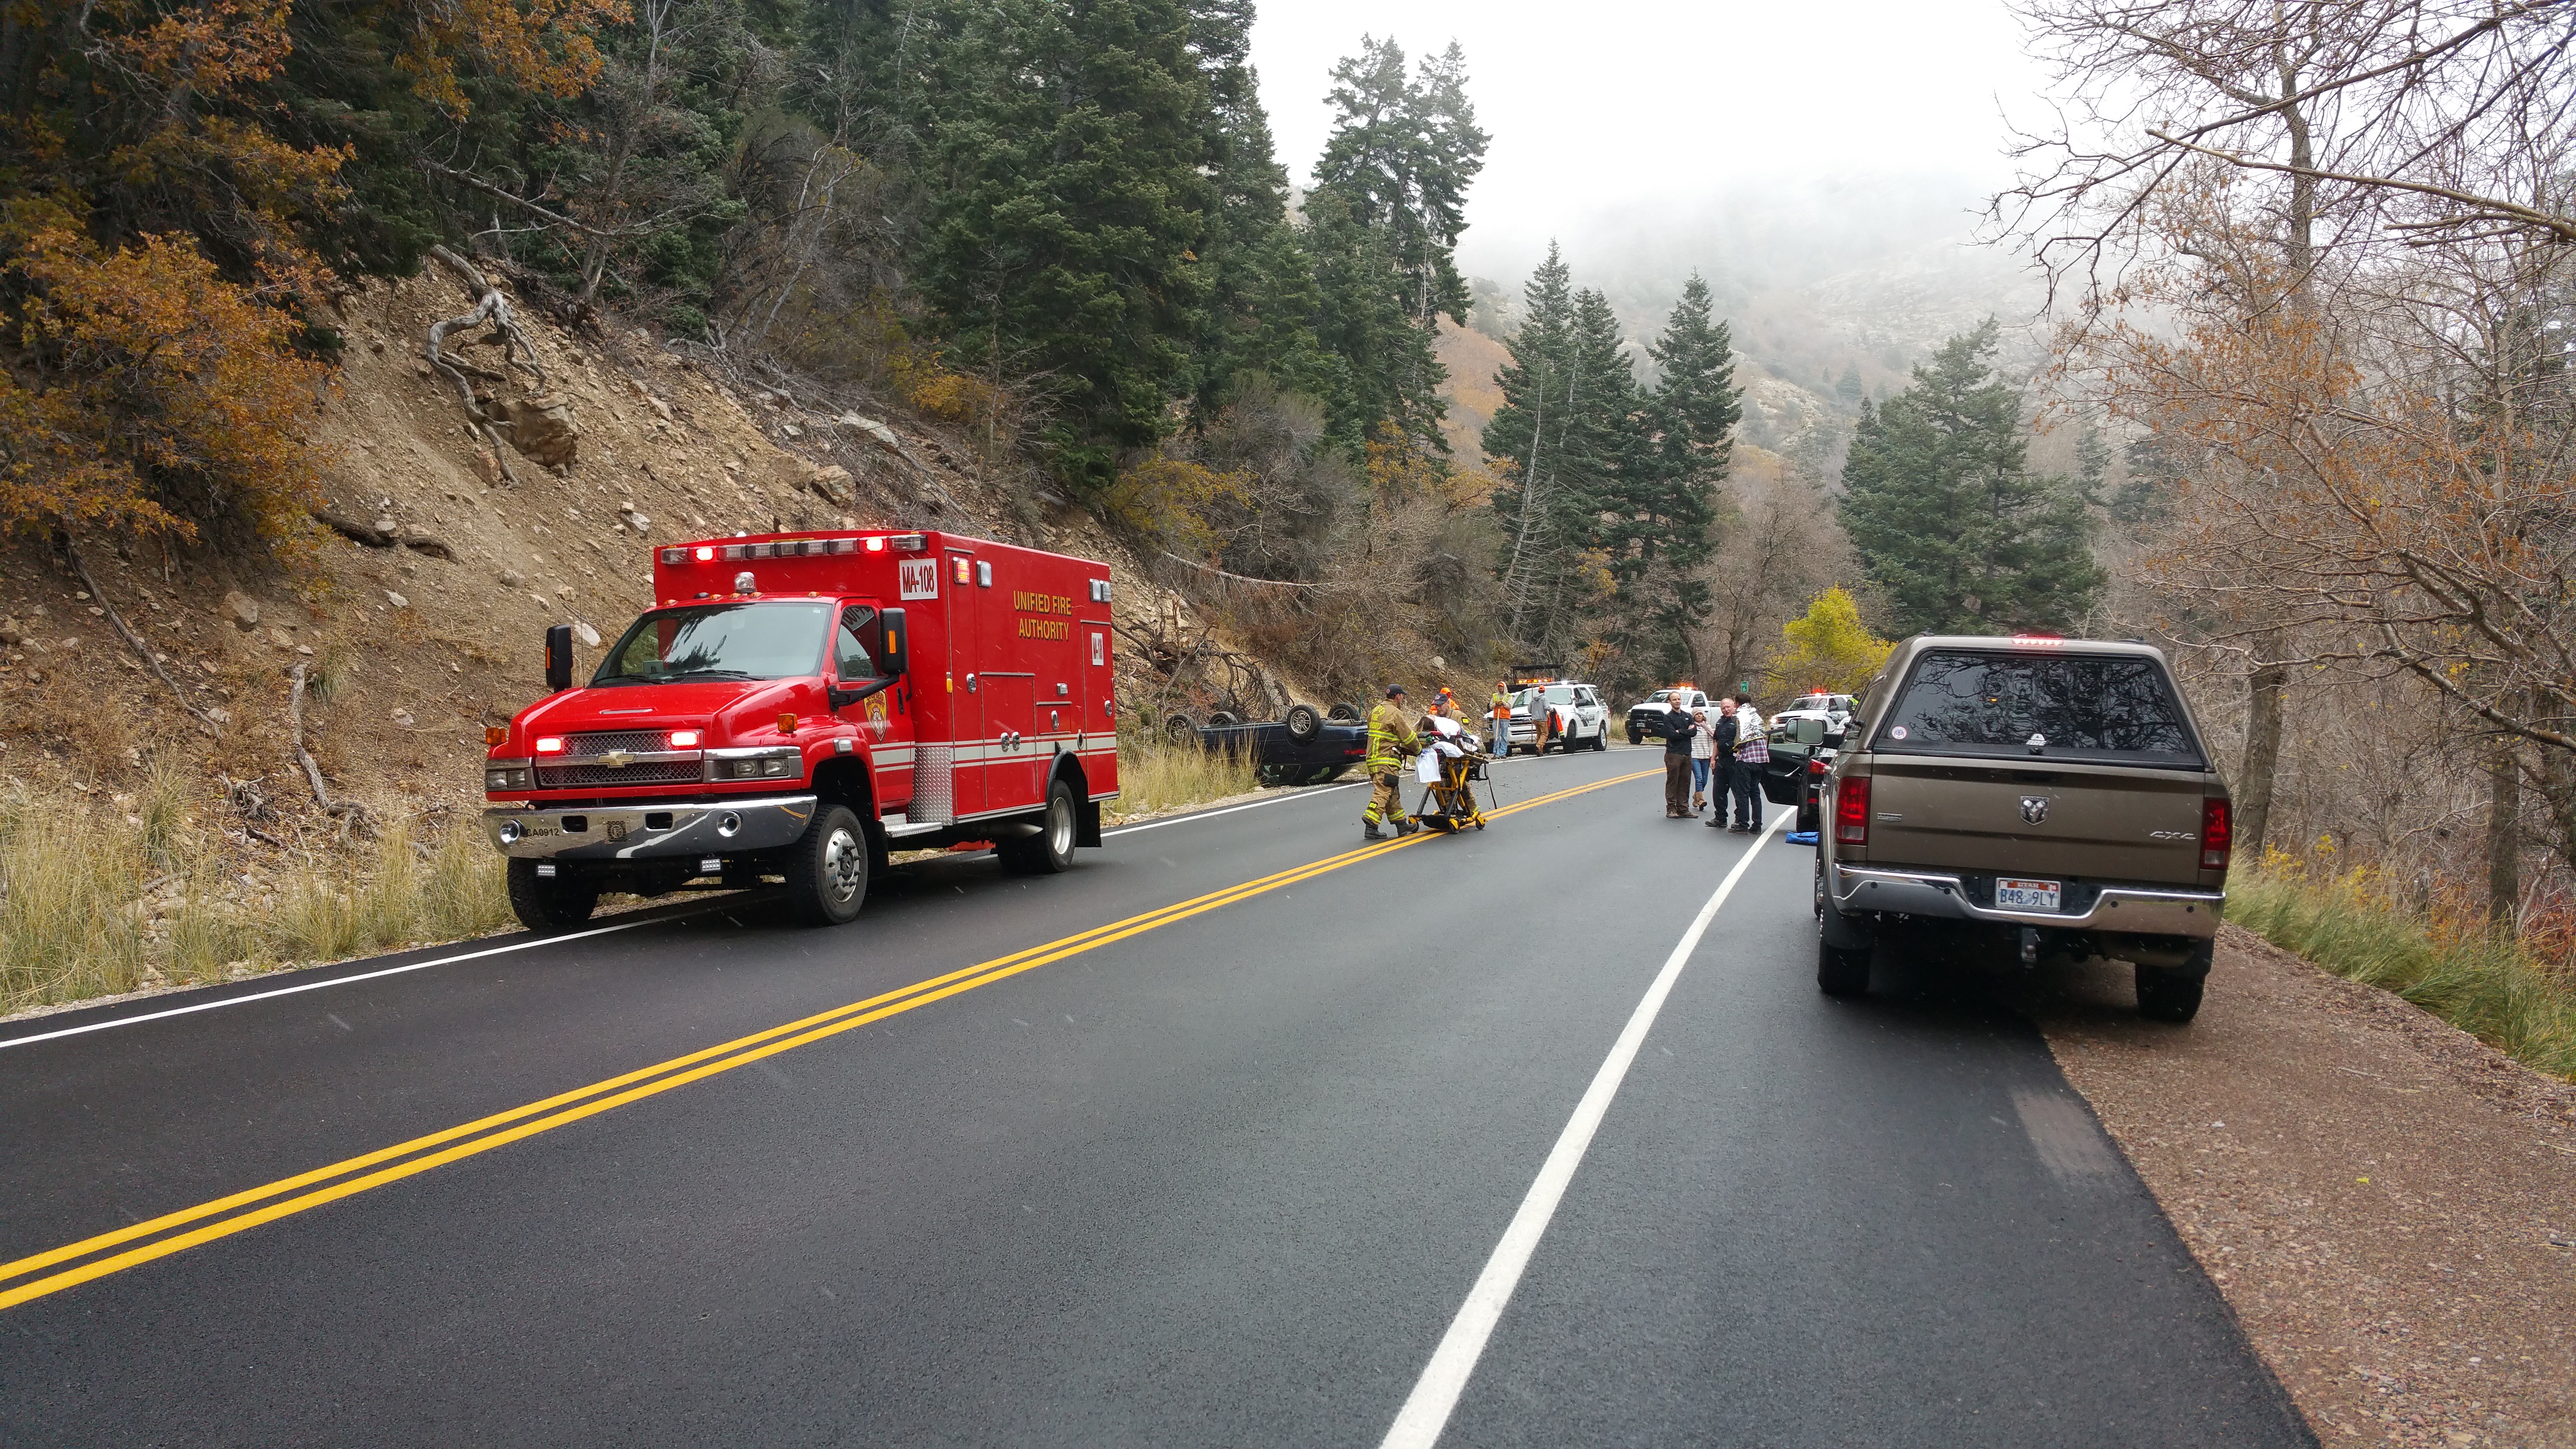 A 21-year-old driver rolled her car in Big Cottonwood Canyon Wednesday. Photo: Gephardt Daily/ Kurt Walter